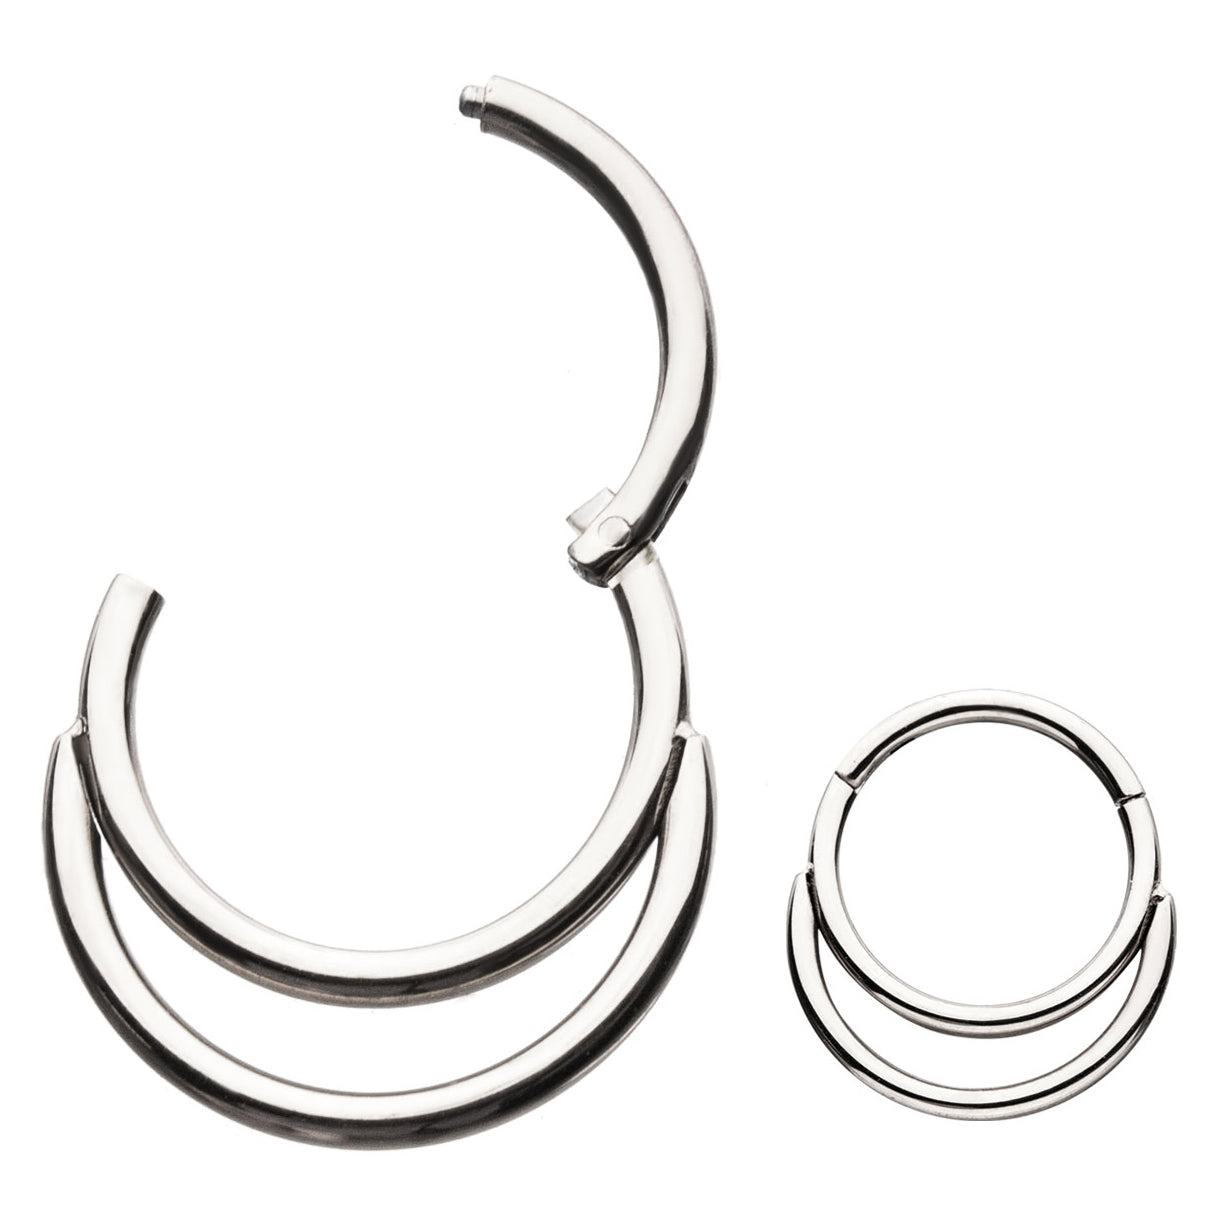 18g Double Stainless Hinged Segment Ring Hinged Rings 18g - 5/16